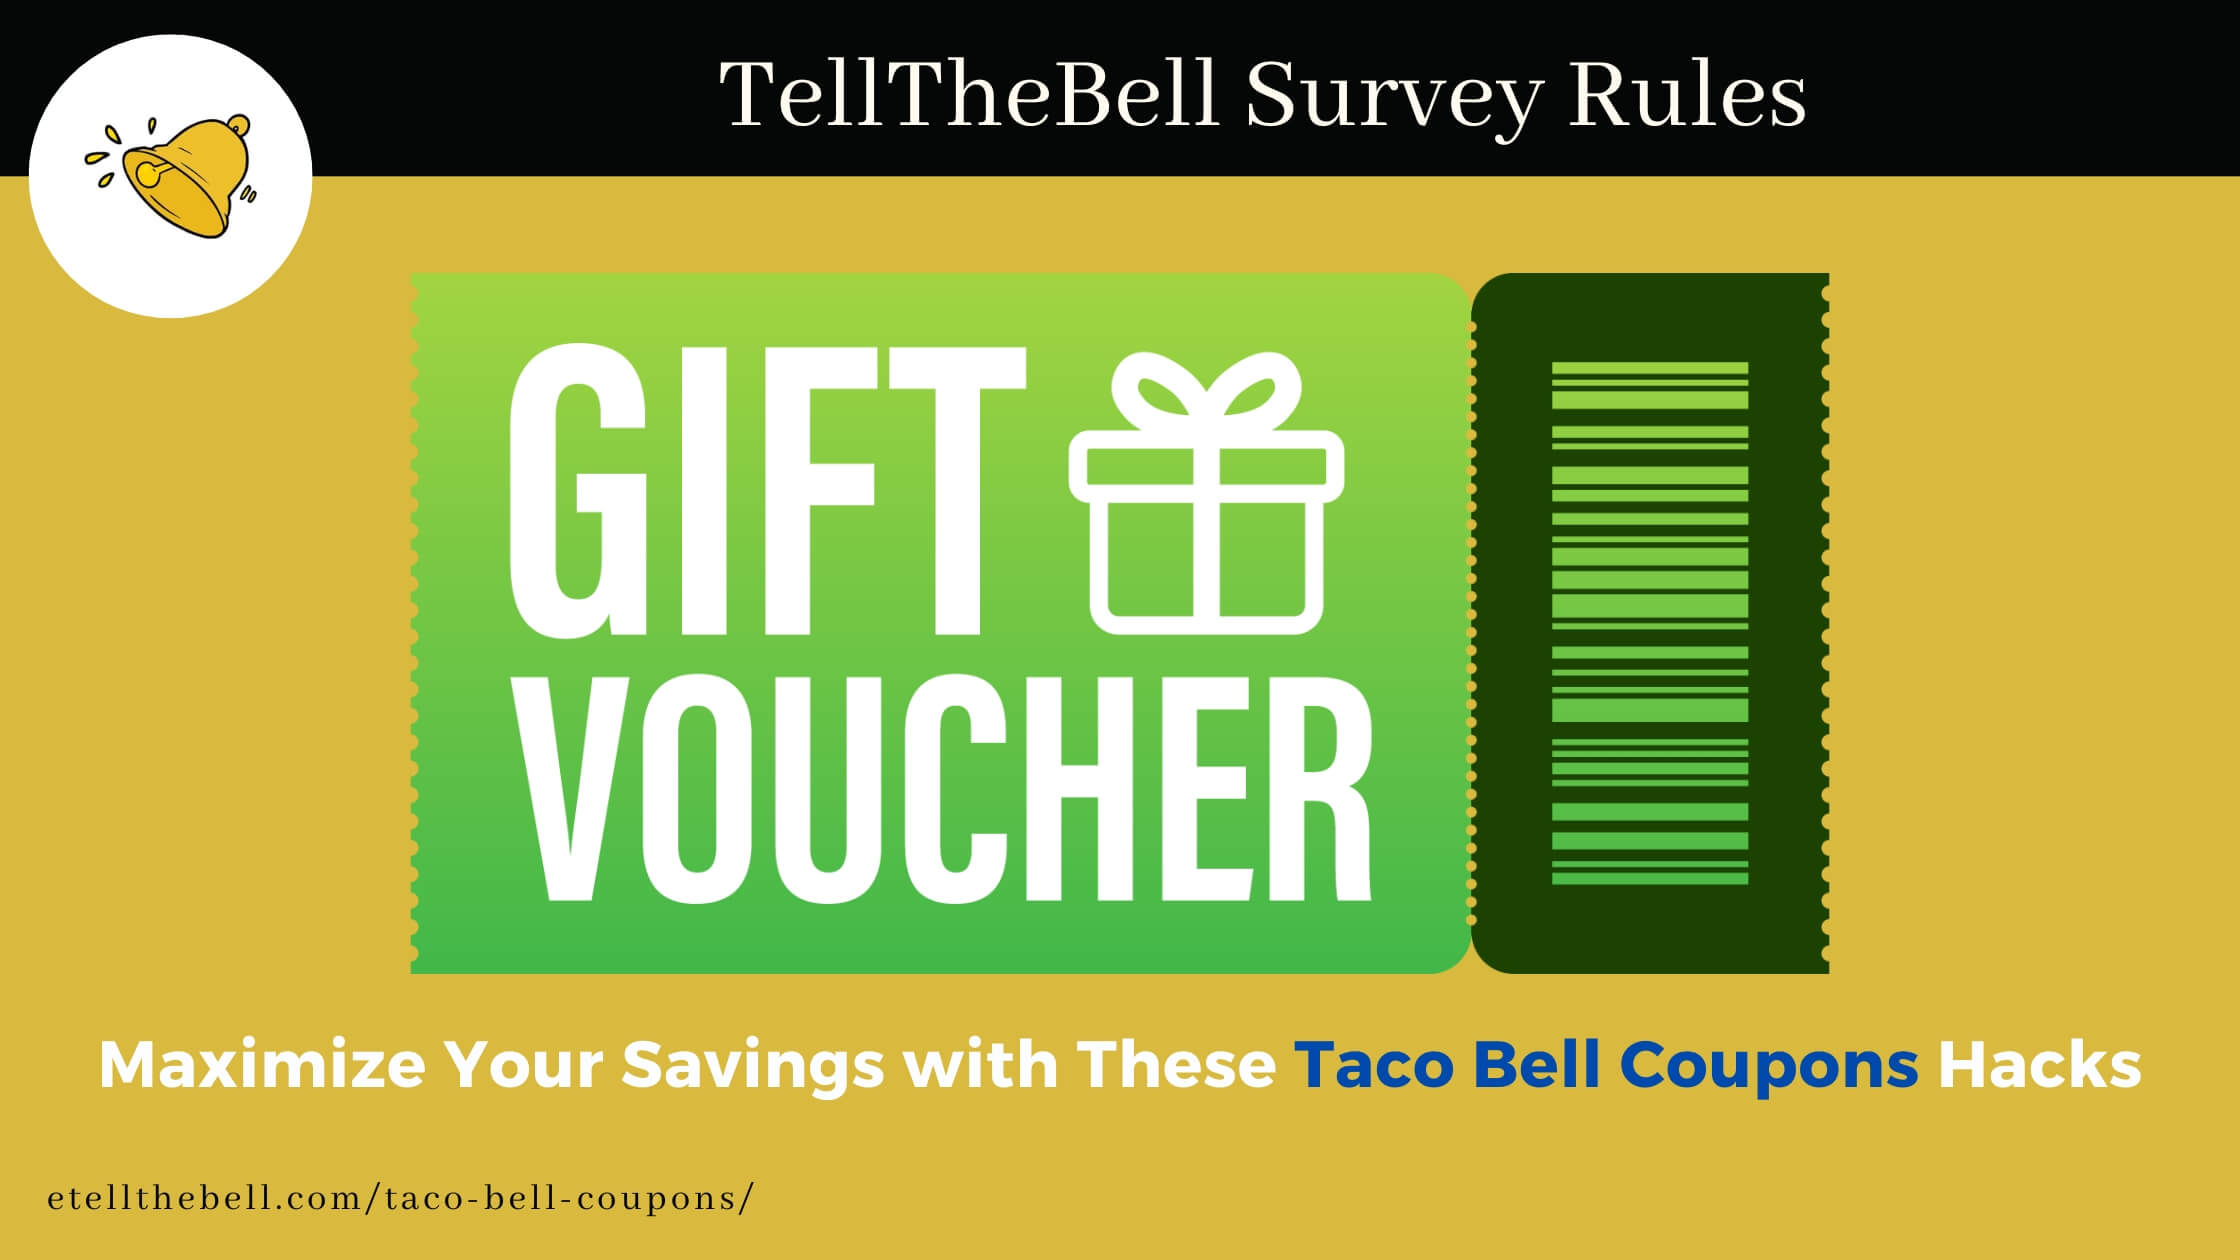 Maximize Your Savings with These Taco Bell Coupons Hacks